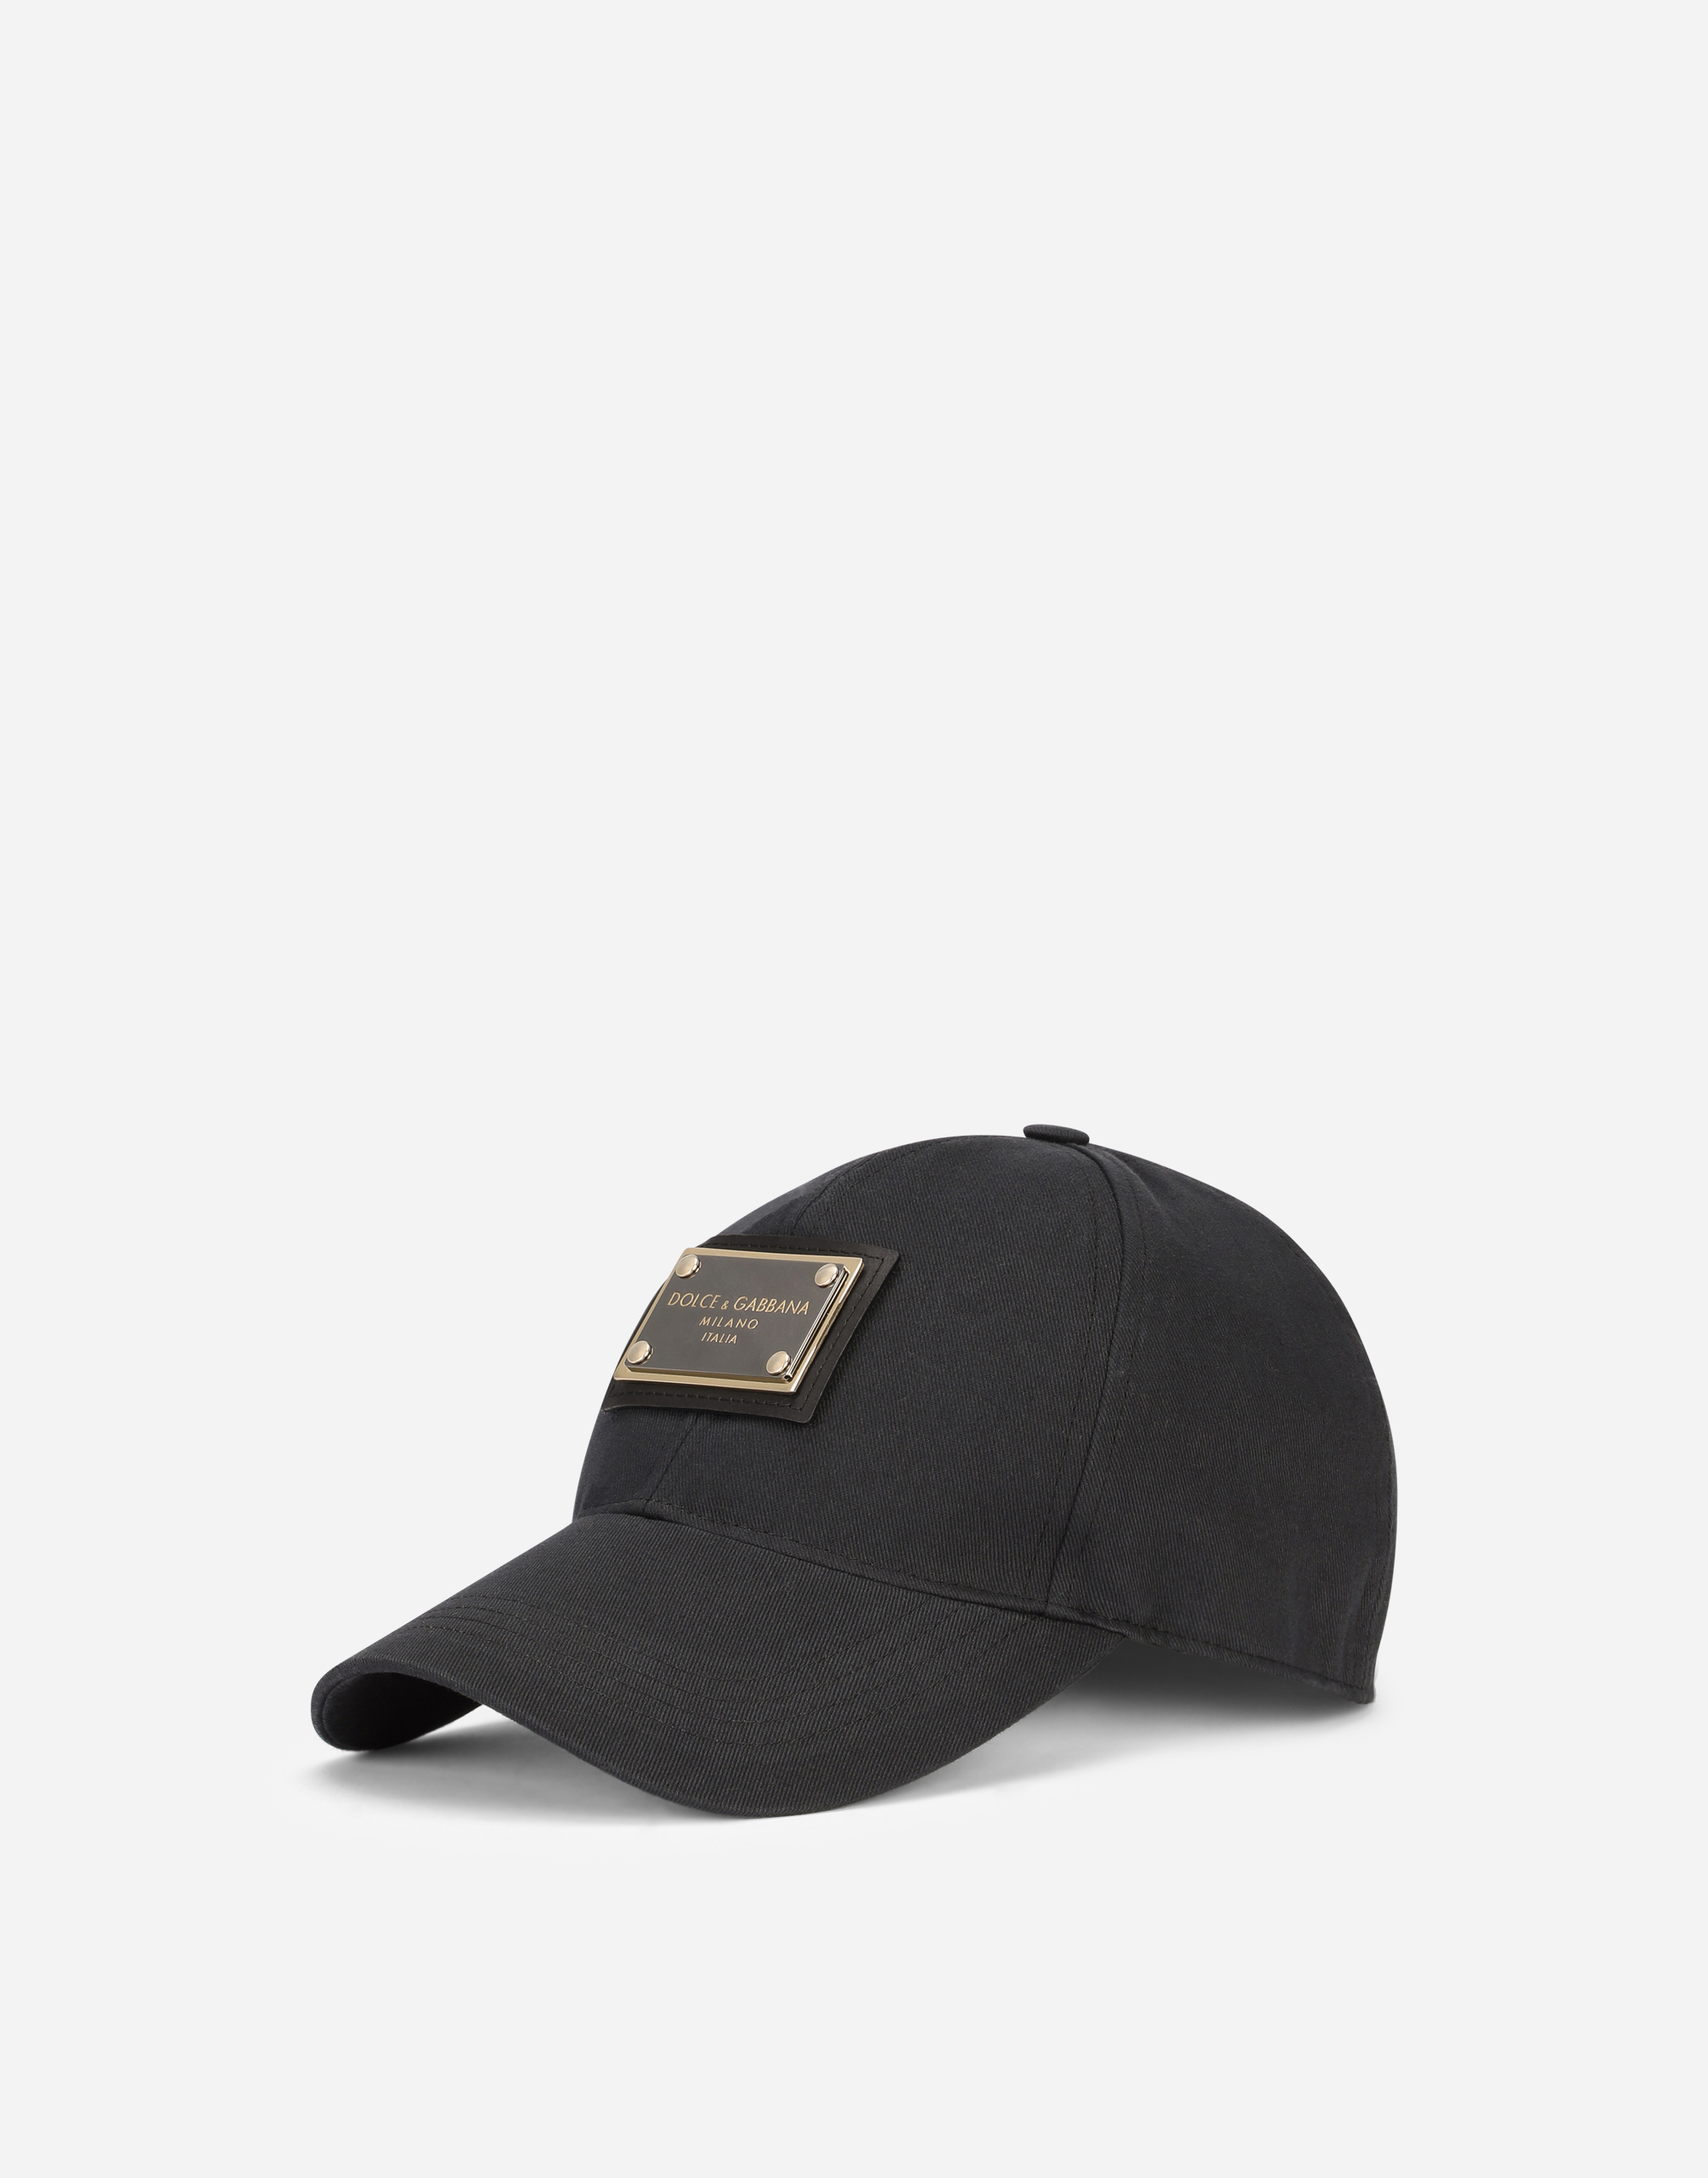 Baseball cap with branded plate in Black